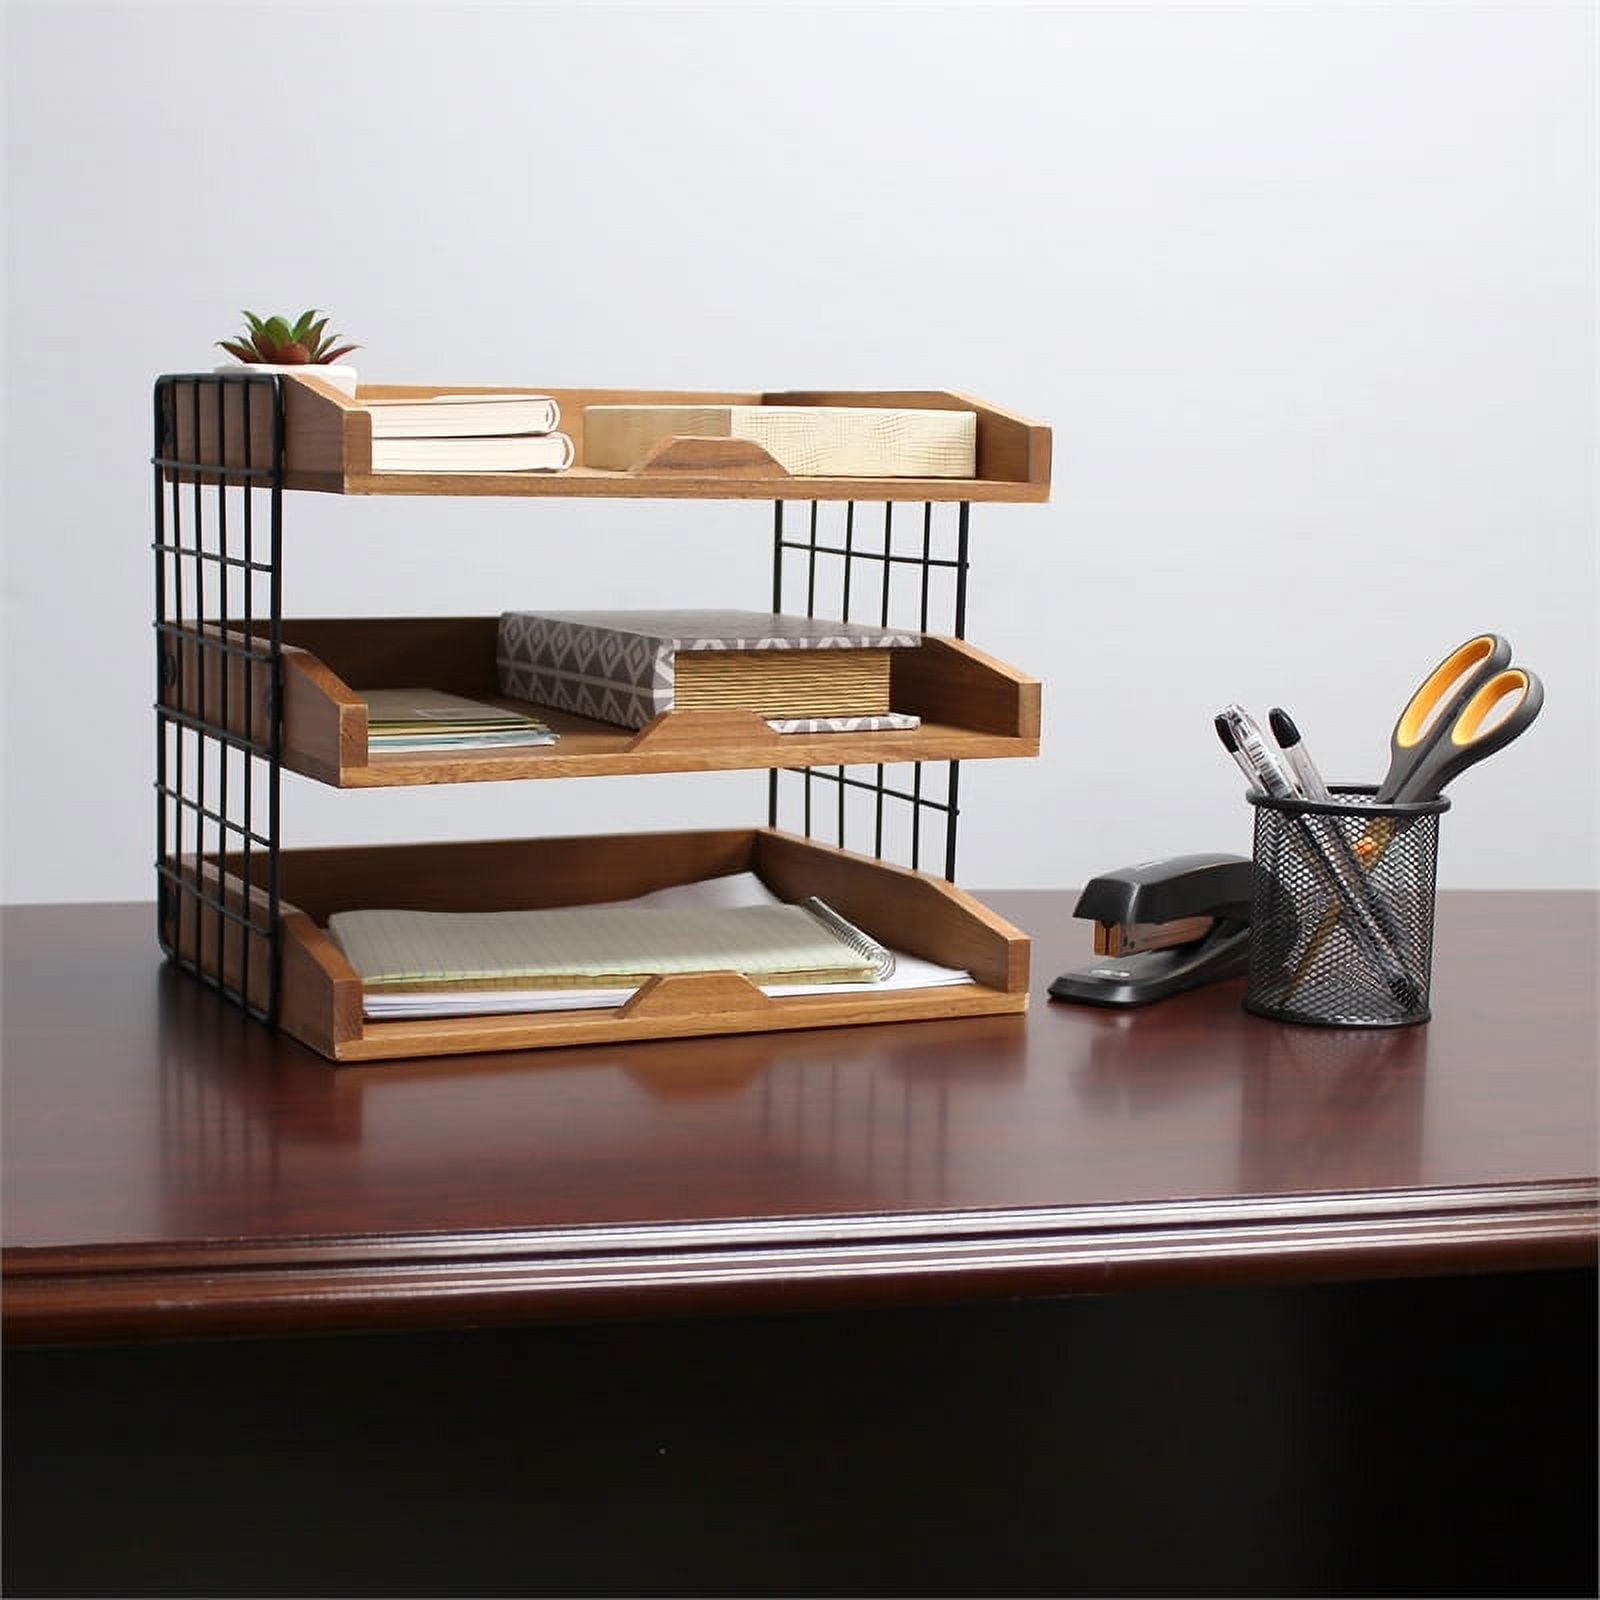 Elegant Designs Home Office Tiered Desk Organizer with Storage Cubbies and Letter Tray, Natural Wood